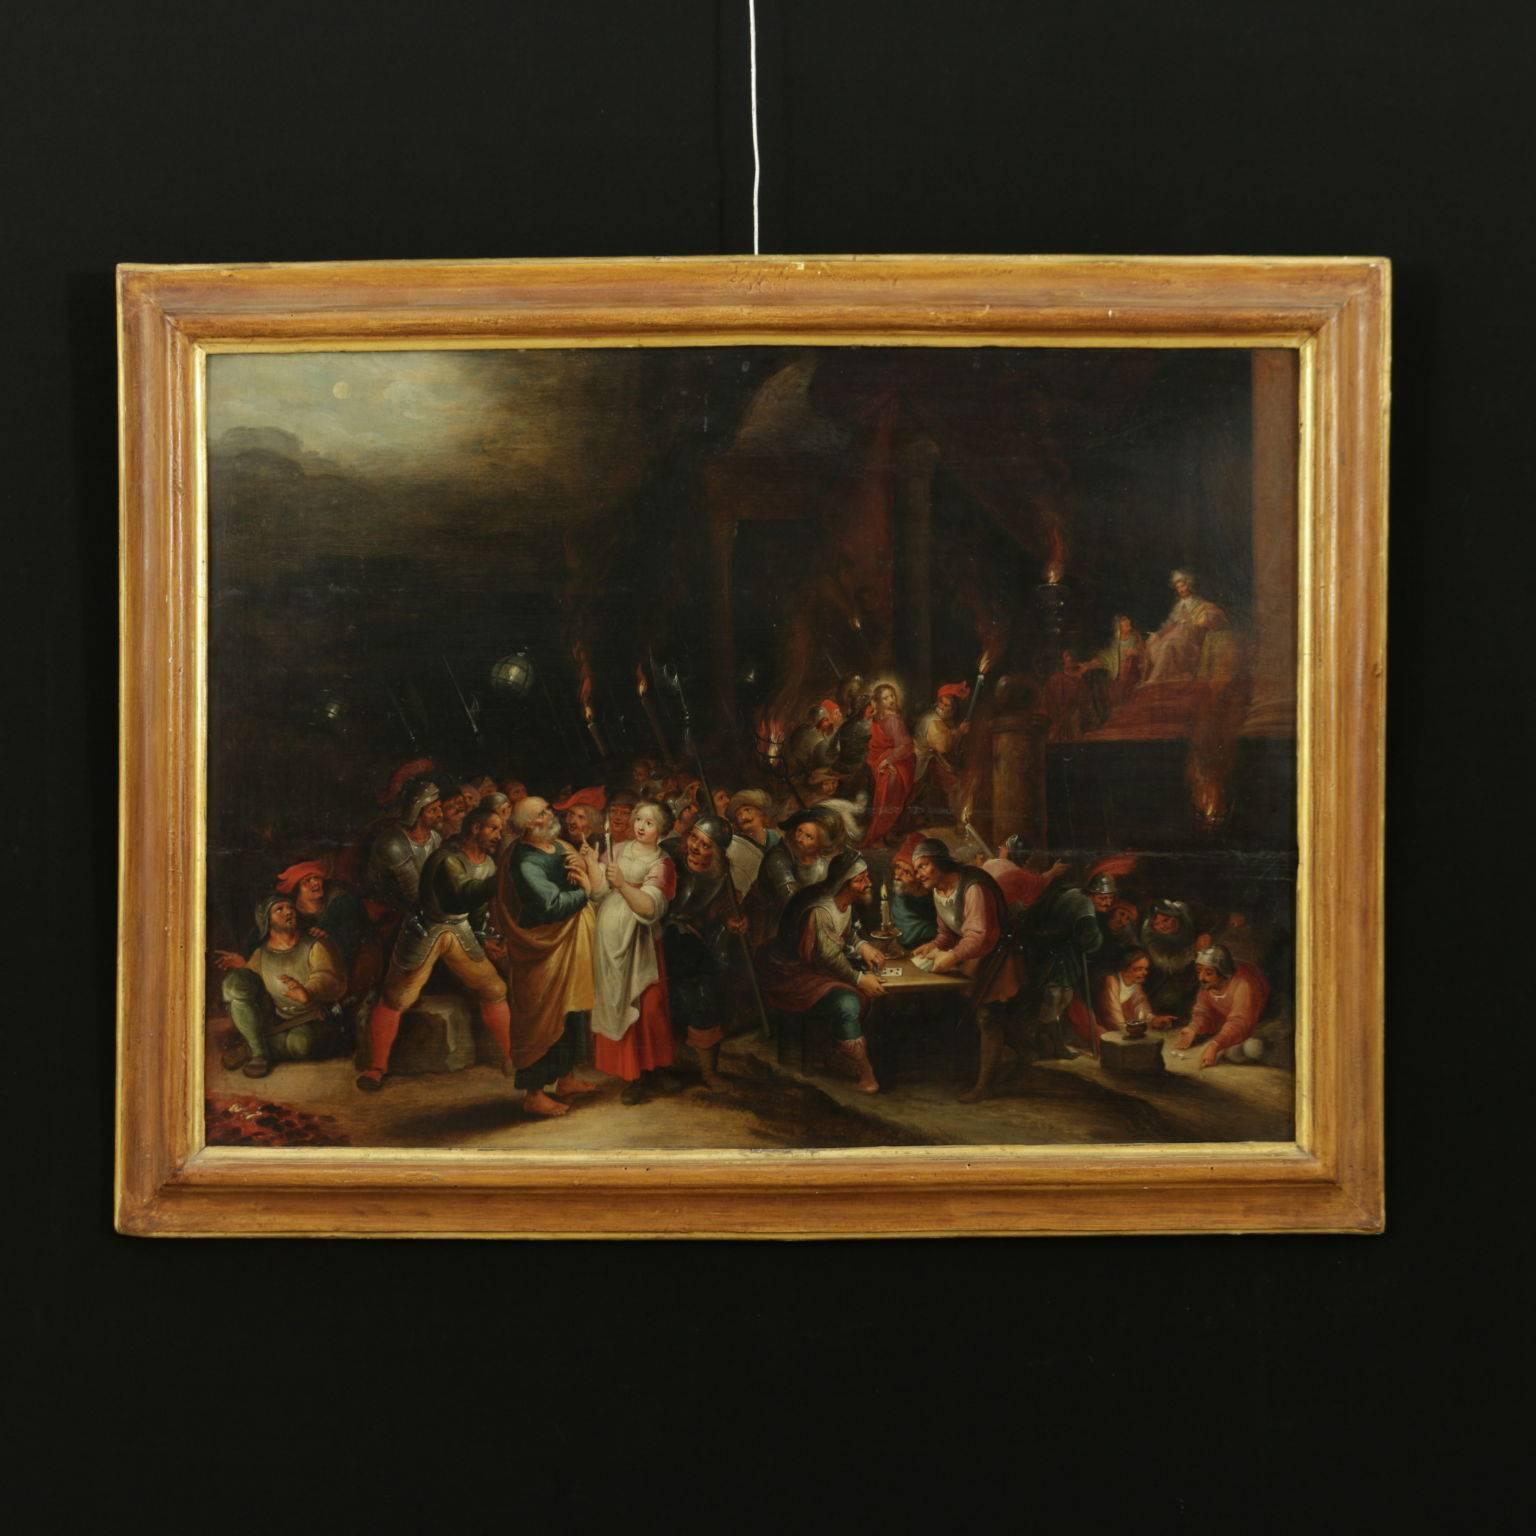 Oil on oak board, coming from an important historical Florentine collection. The collection started by an ancestor of the family who was in Vienna in 1798 and then in Wurzburg until 1813, as a companion of exile of the Grand Duke of Tuscany